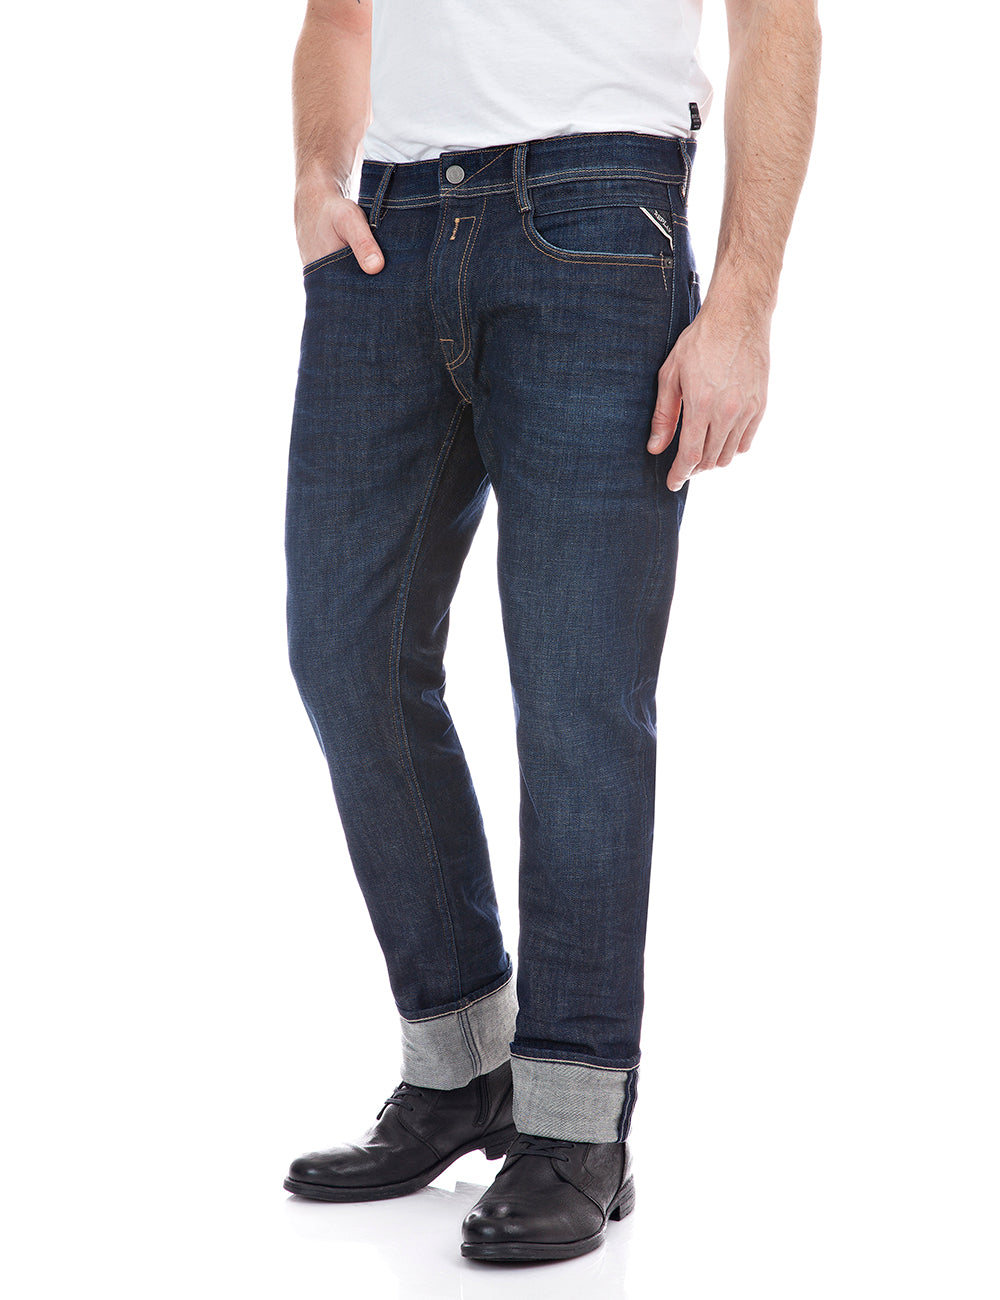 Replay Rocco Jeans Dark Blue Wash